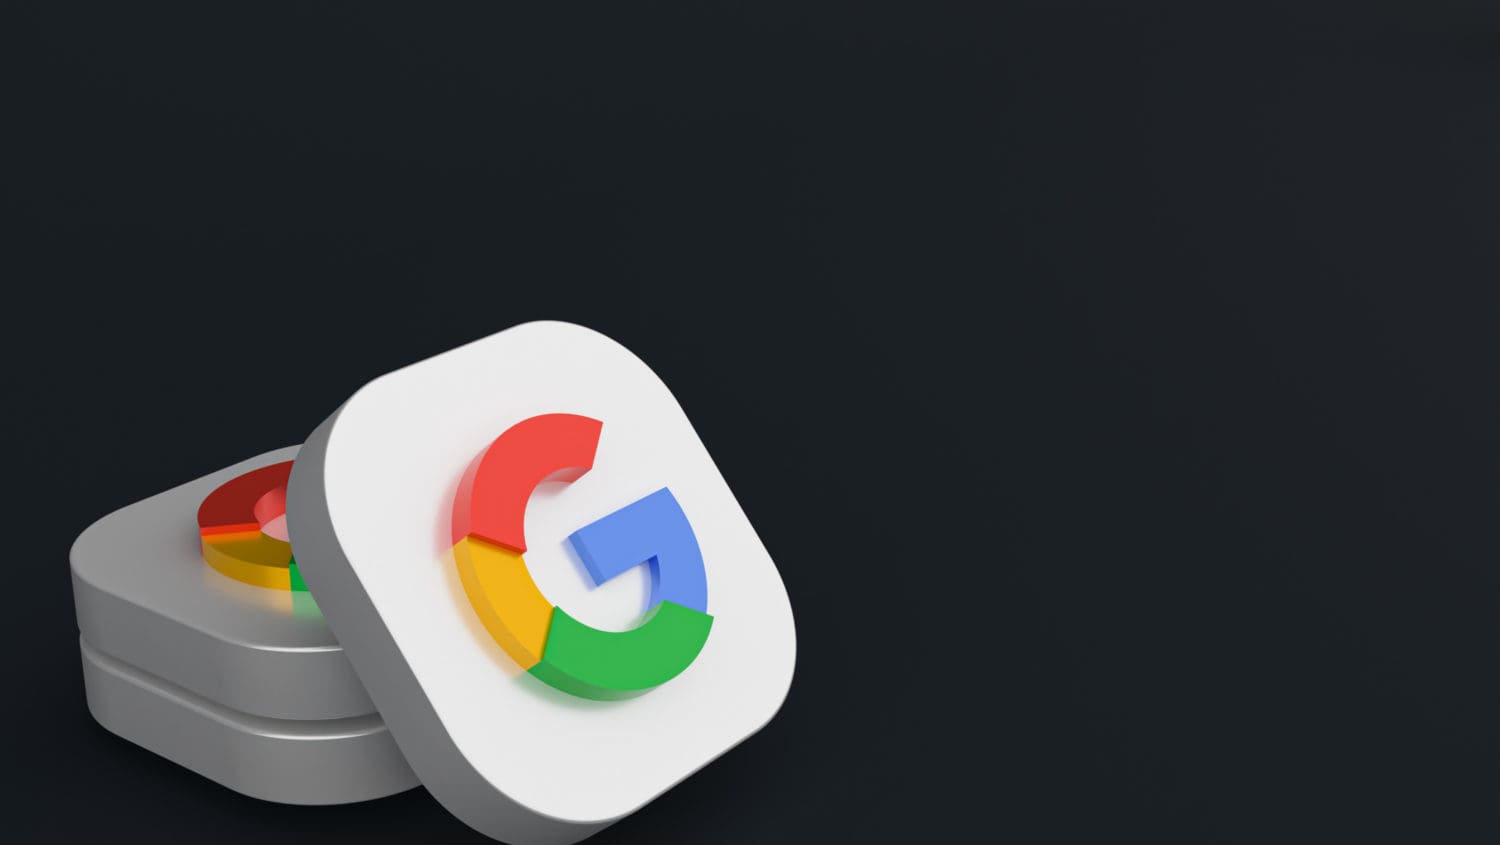 Two stacked, white, square objects each displaying a colorful "G" (Google logo) on their surfaces. The logos feature the colors blue, red, yellow, and green. The background is dark, creating a stark contrast with the bright logos.